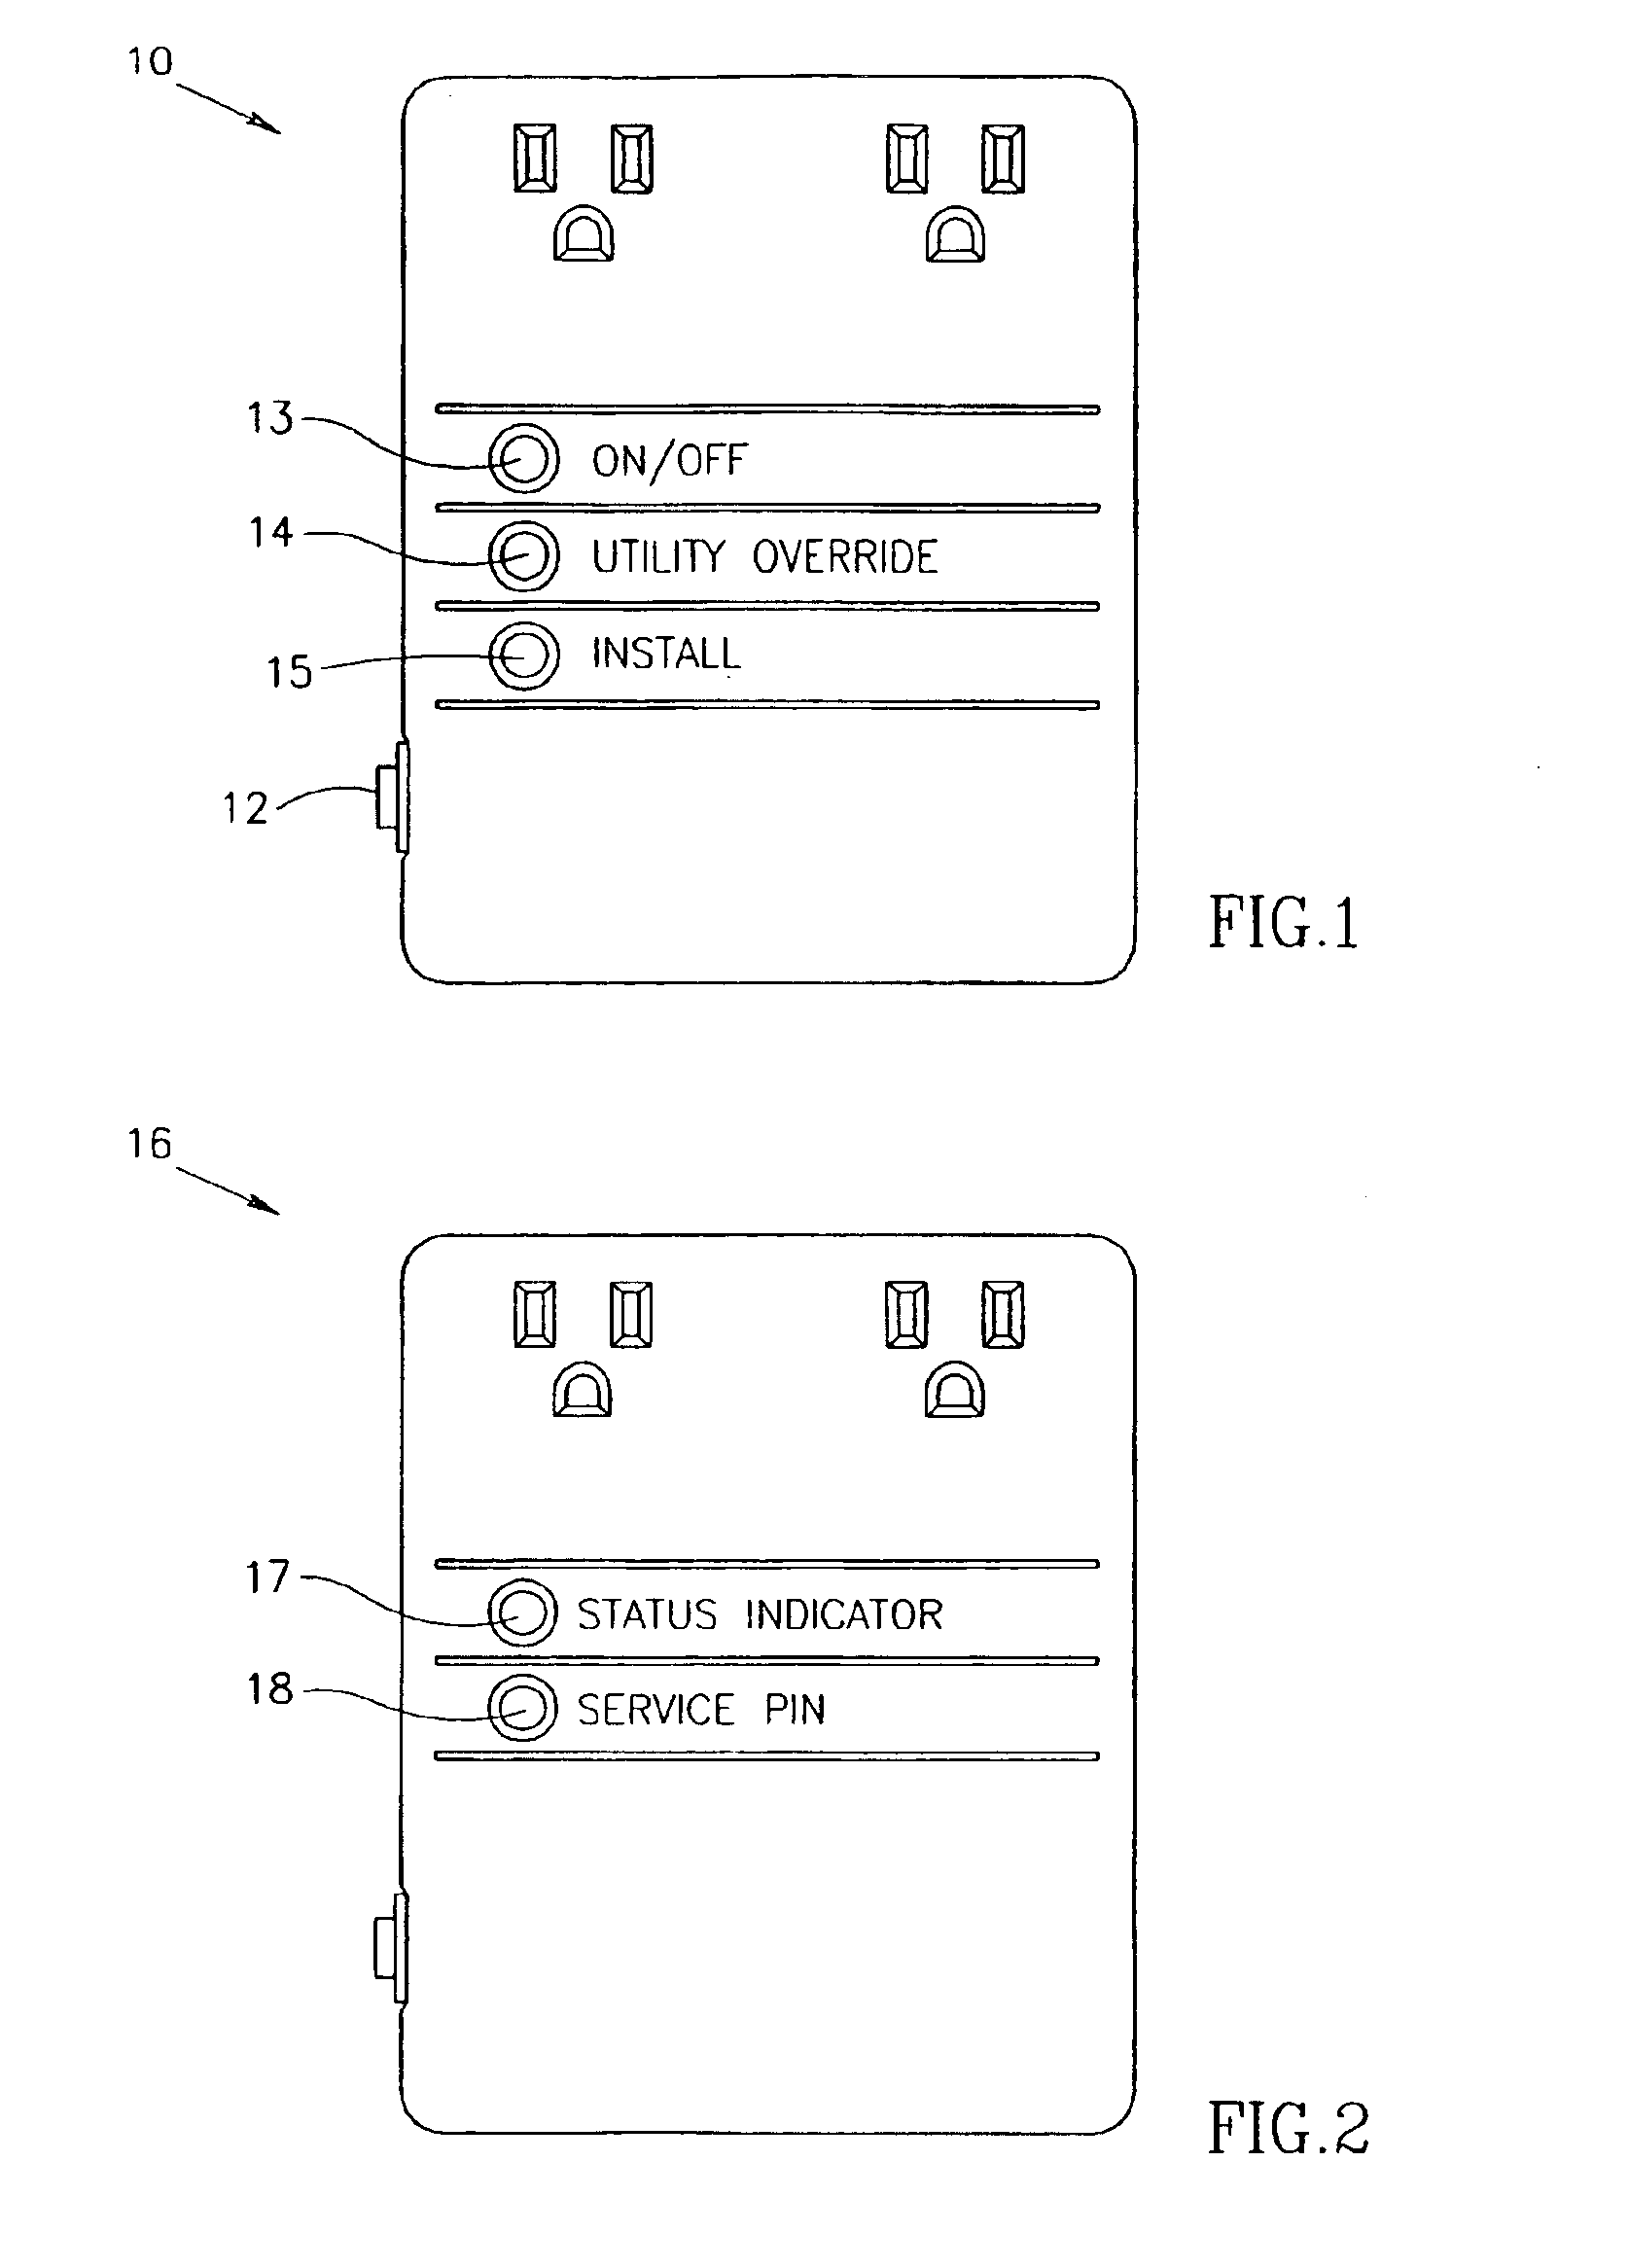 Method of adding a device to a network